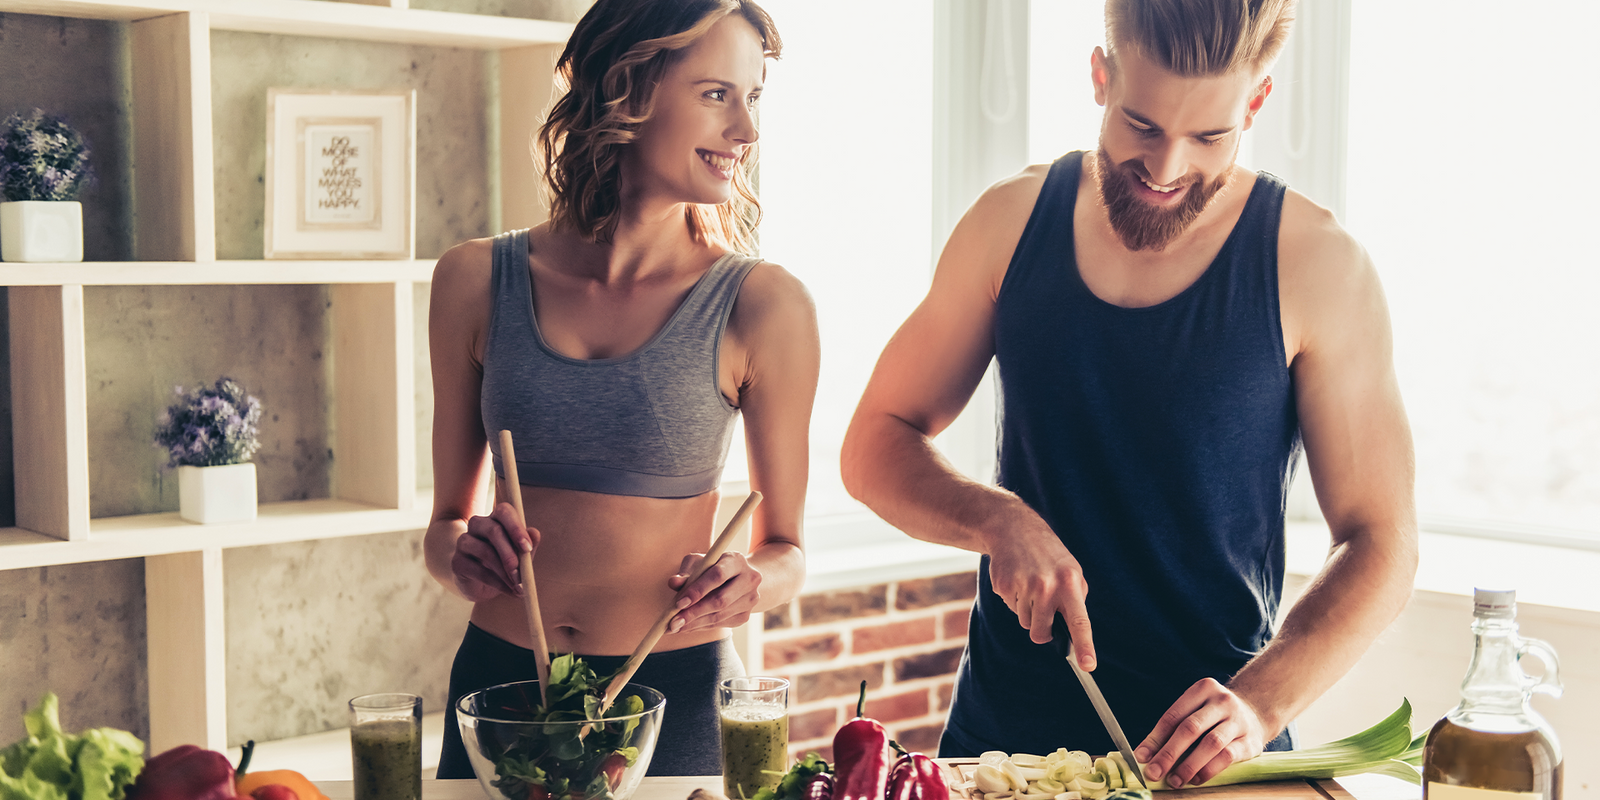 5 Healthy Sports Nutrition Swaps to Make Today